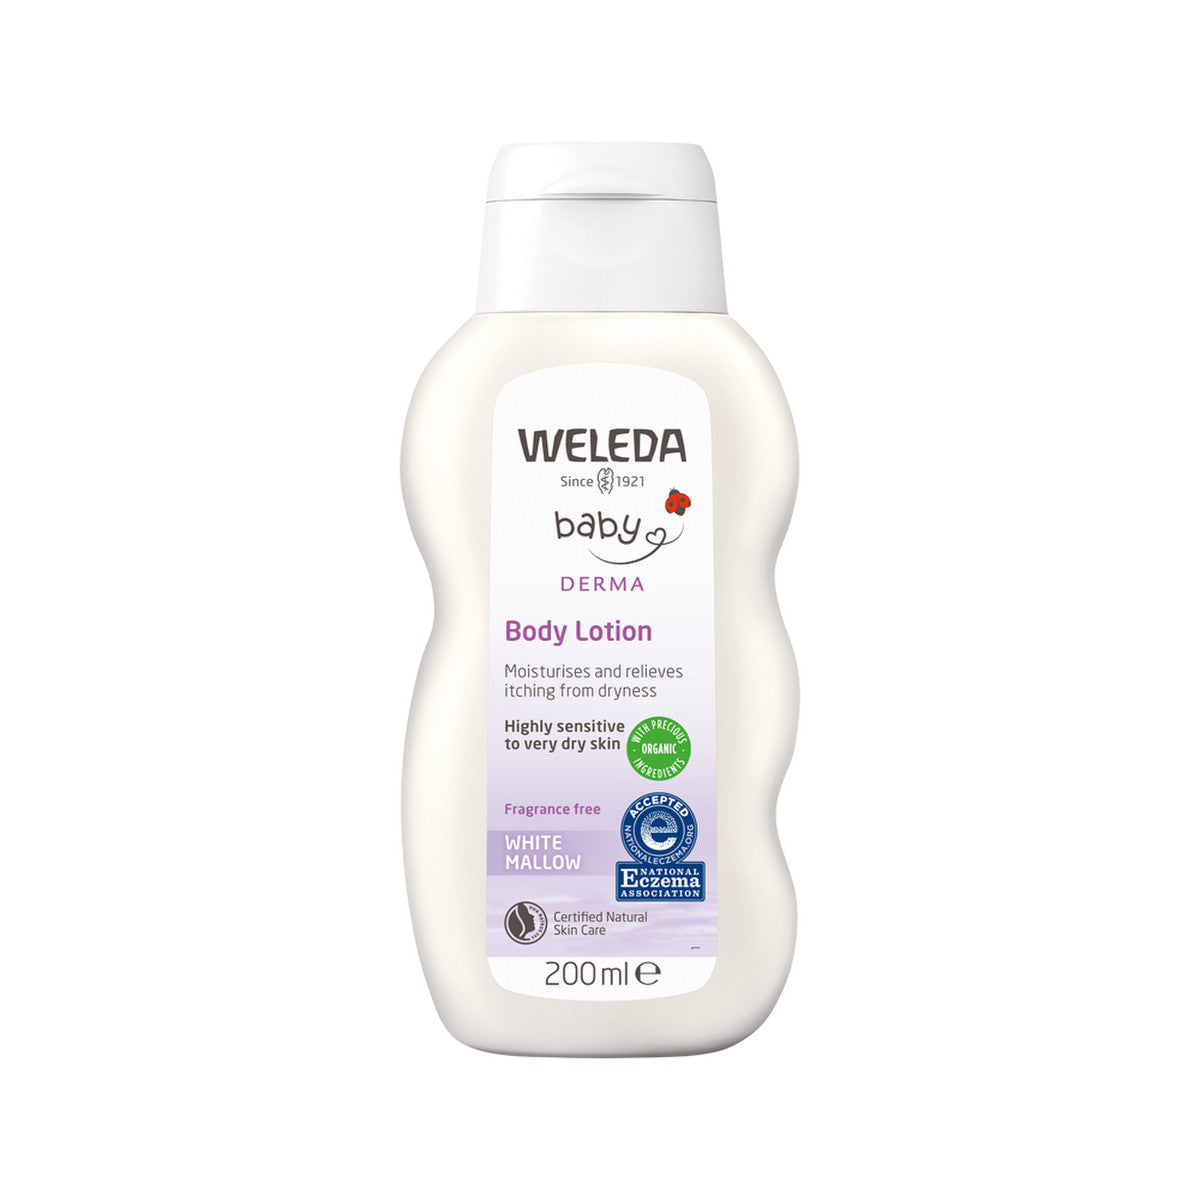 Weleda White Mallow Body Lotion 200ml-The Living Co.